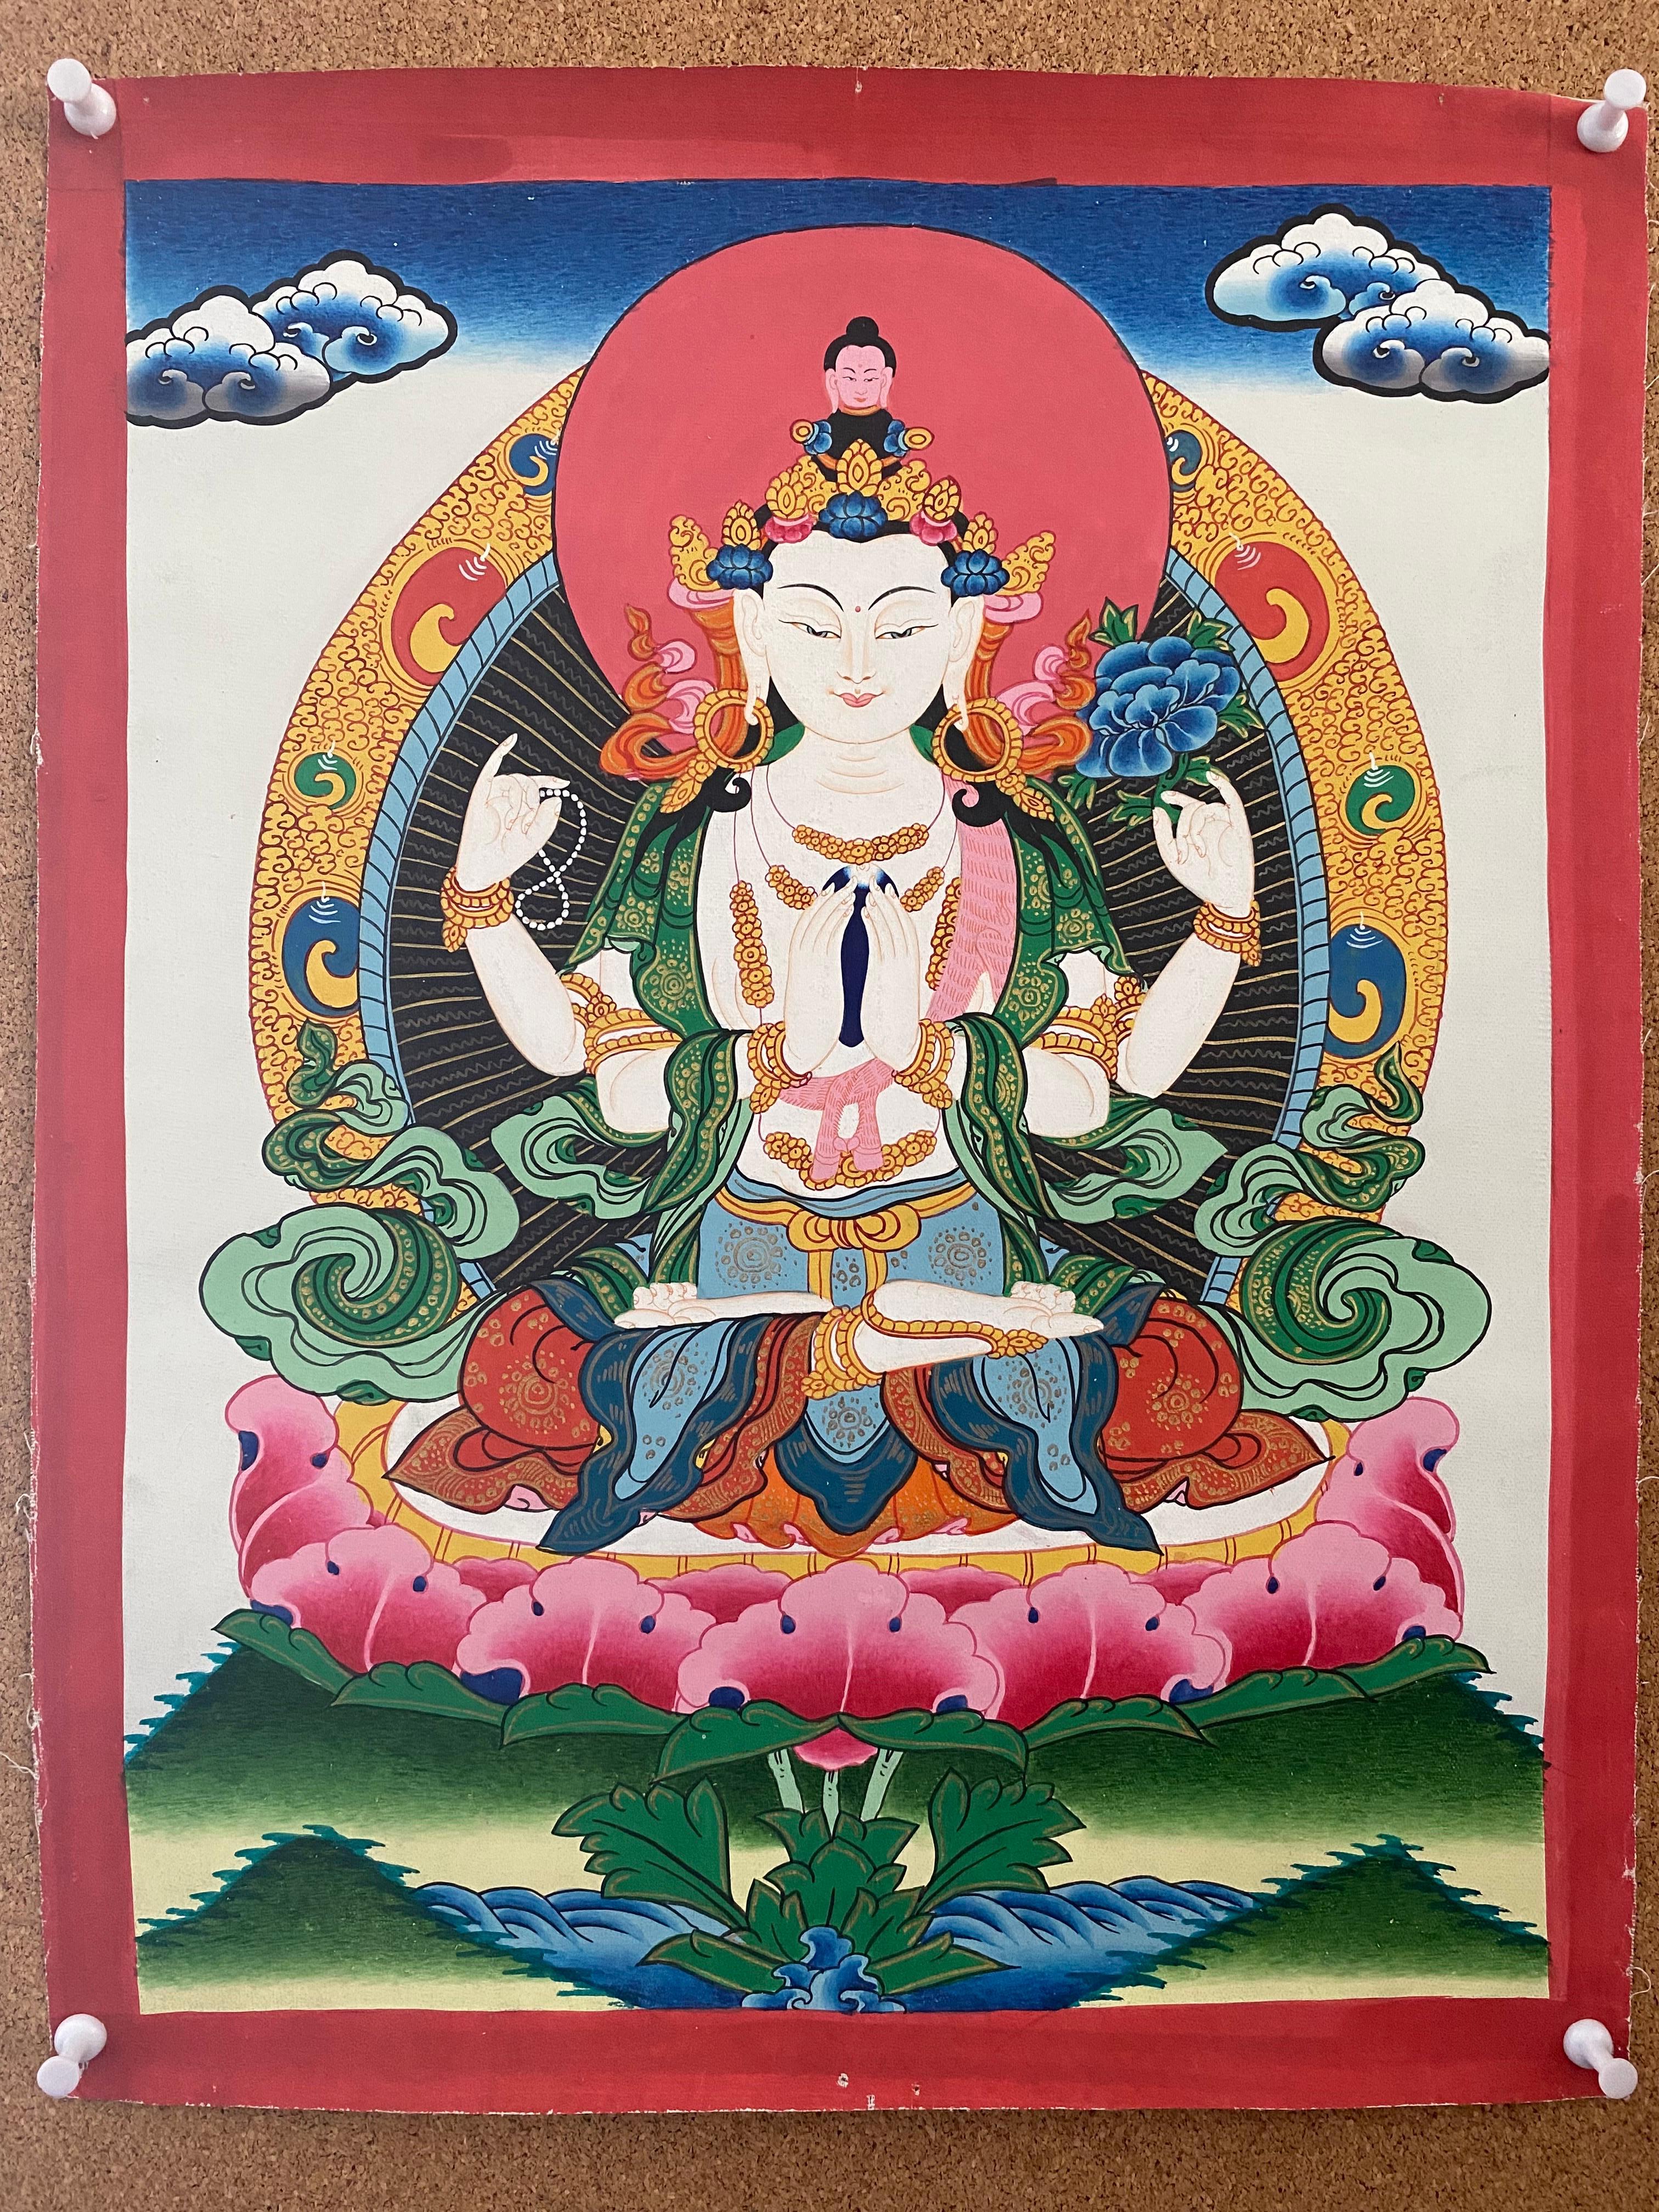 This beautiful unframed hand painted Chenrezig Thangka can be framed according to your choice.
Chenrezig is the Buddha of Compassion. It is believed that Chenrezig is the embodiment of boundless loving-kindness and compassion. Every person whose